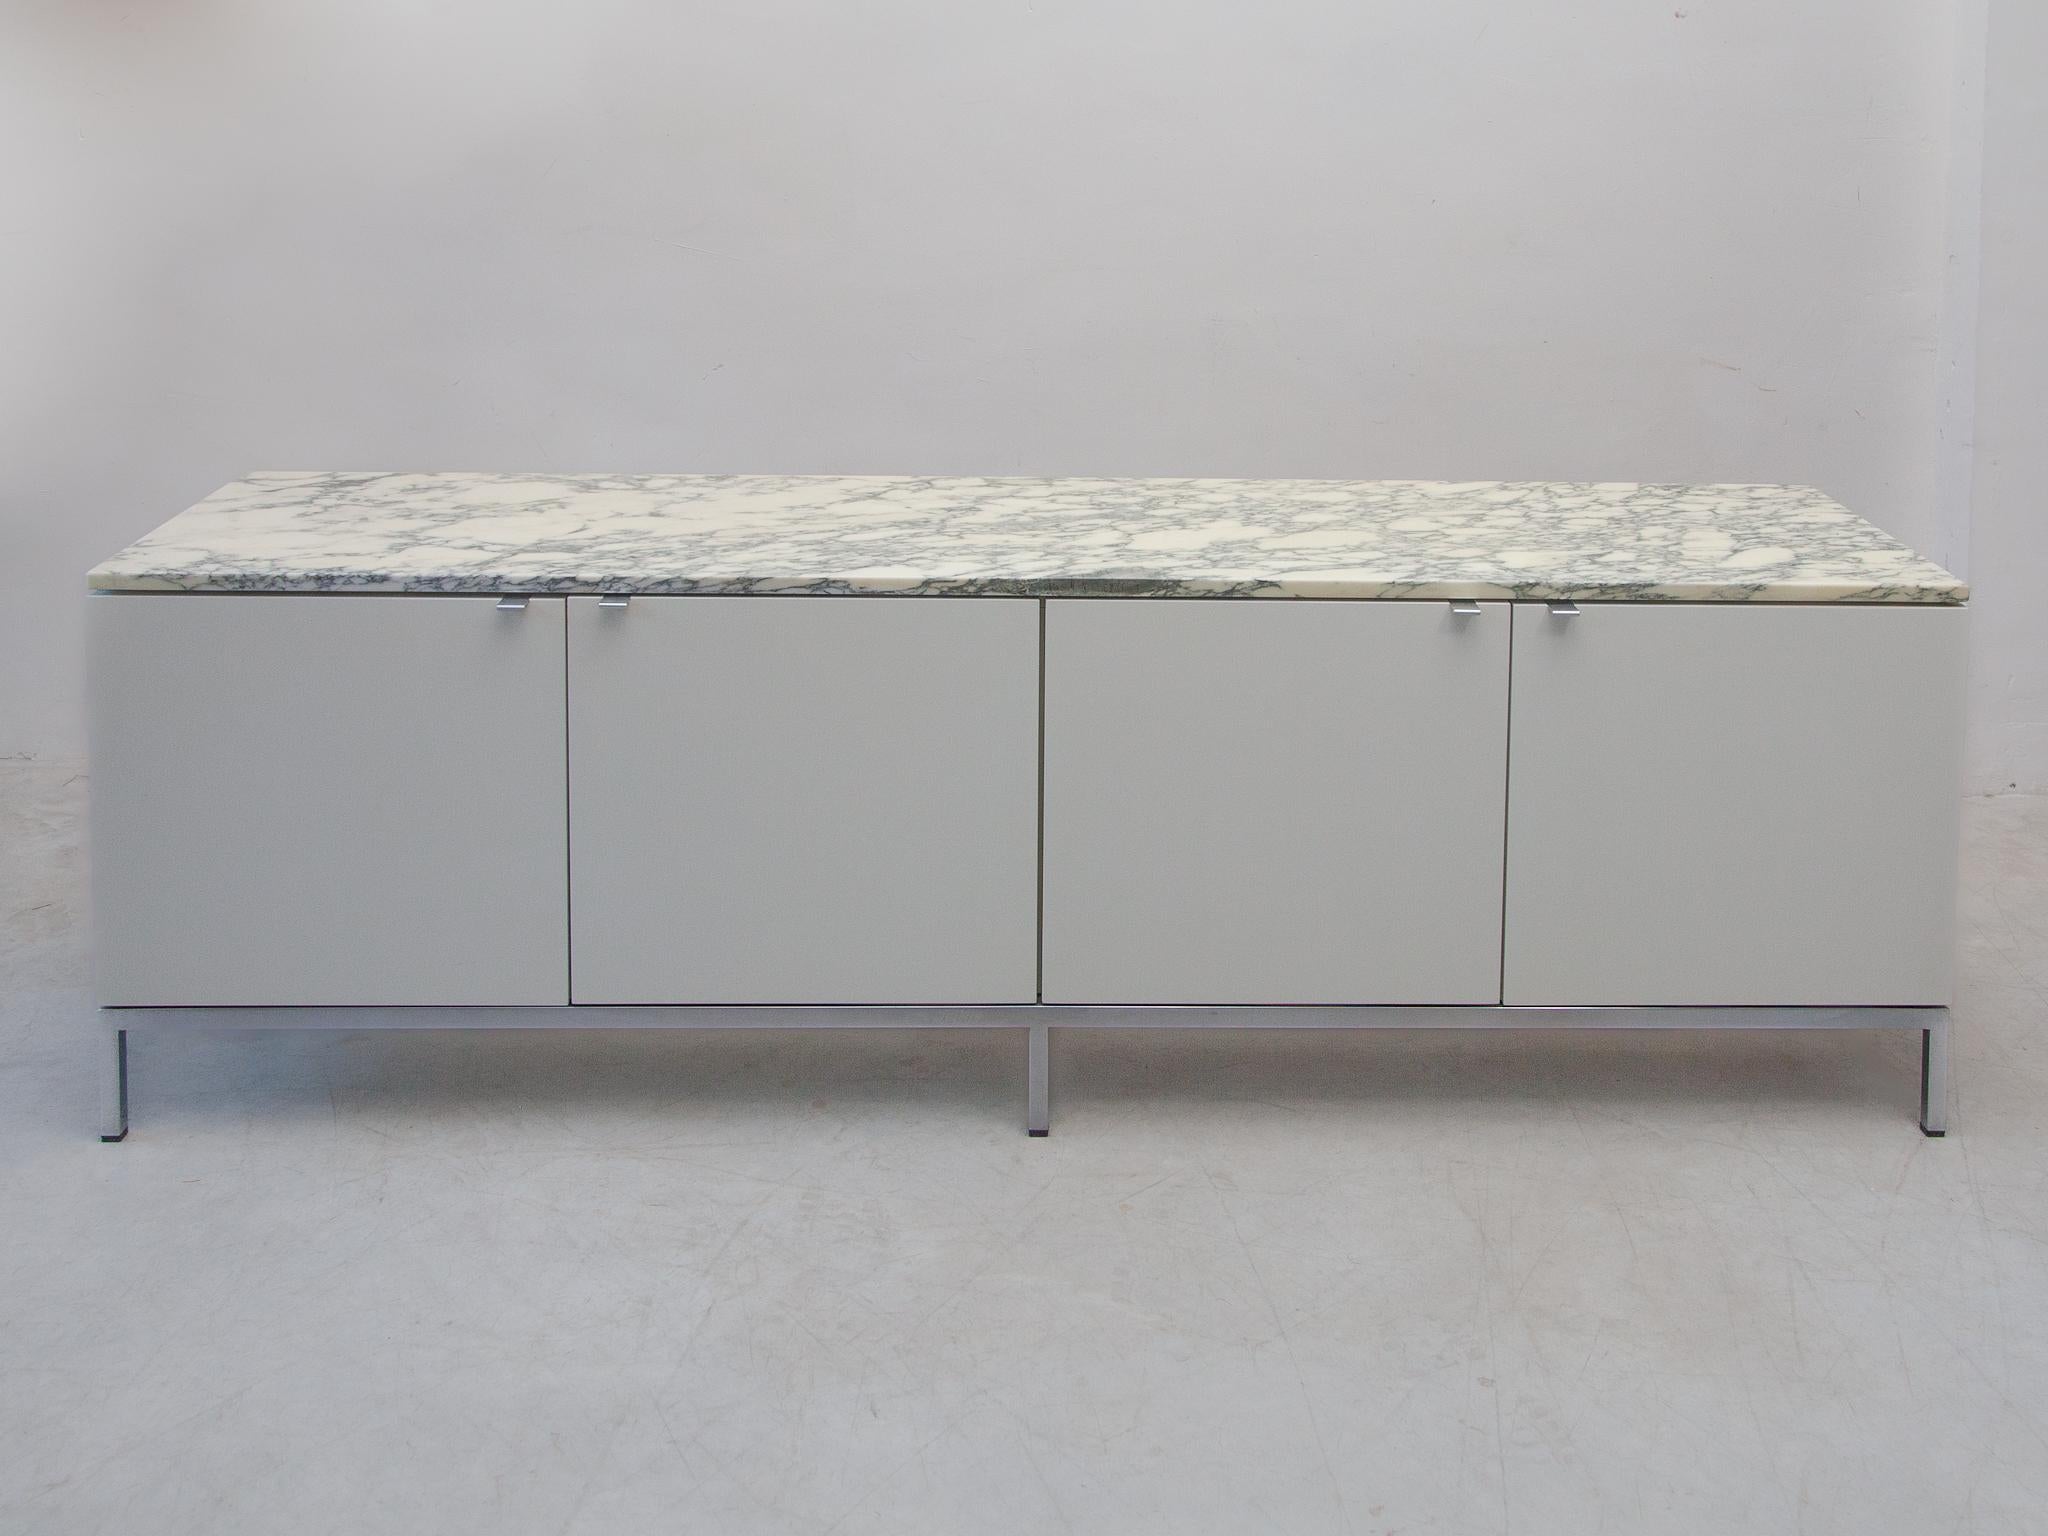 Marble top, four doors, luxurious sideboard designed by Florence Knoll for Knoll International, 1960s. Freestanding minimalistic sideboard with elegant details equipped and smart storage facilities. This piece gets an special quality appearance due